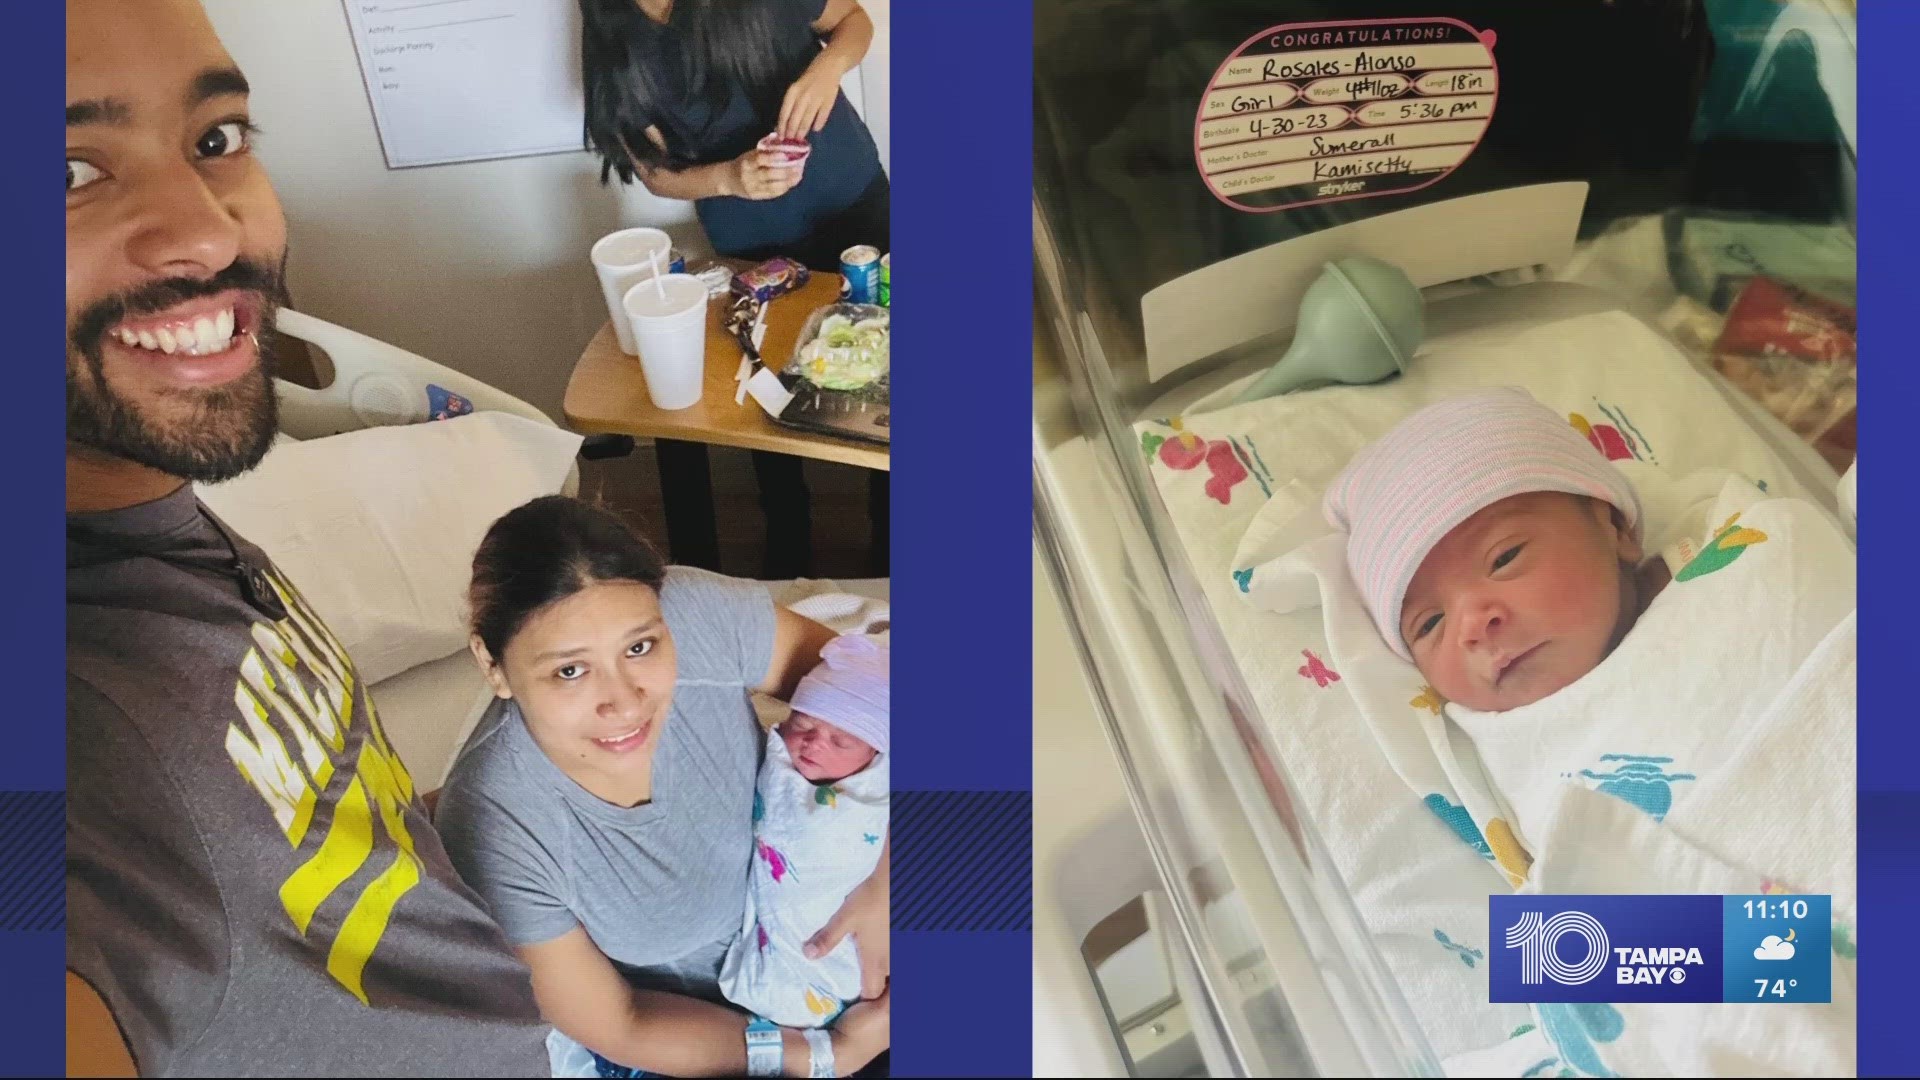 The baby's father, Luis Lopez, said he's grateful to the Hillsborough Sheriff's Department "for having amazing officers that helped us to deliver our baby girl."